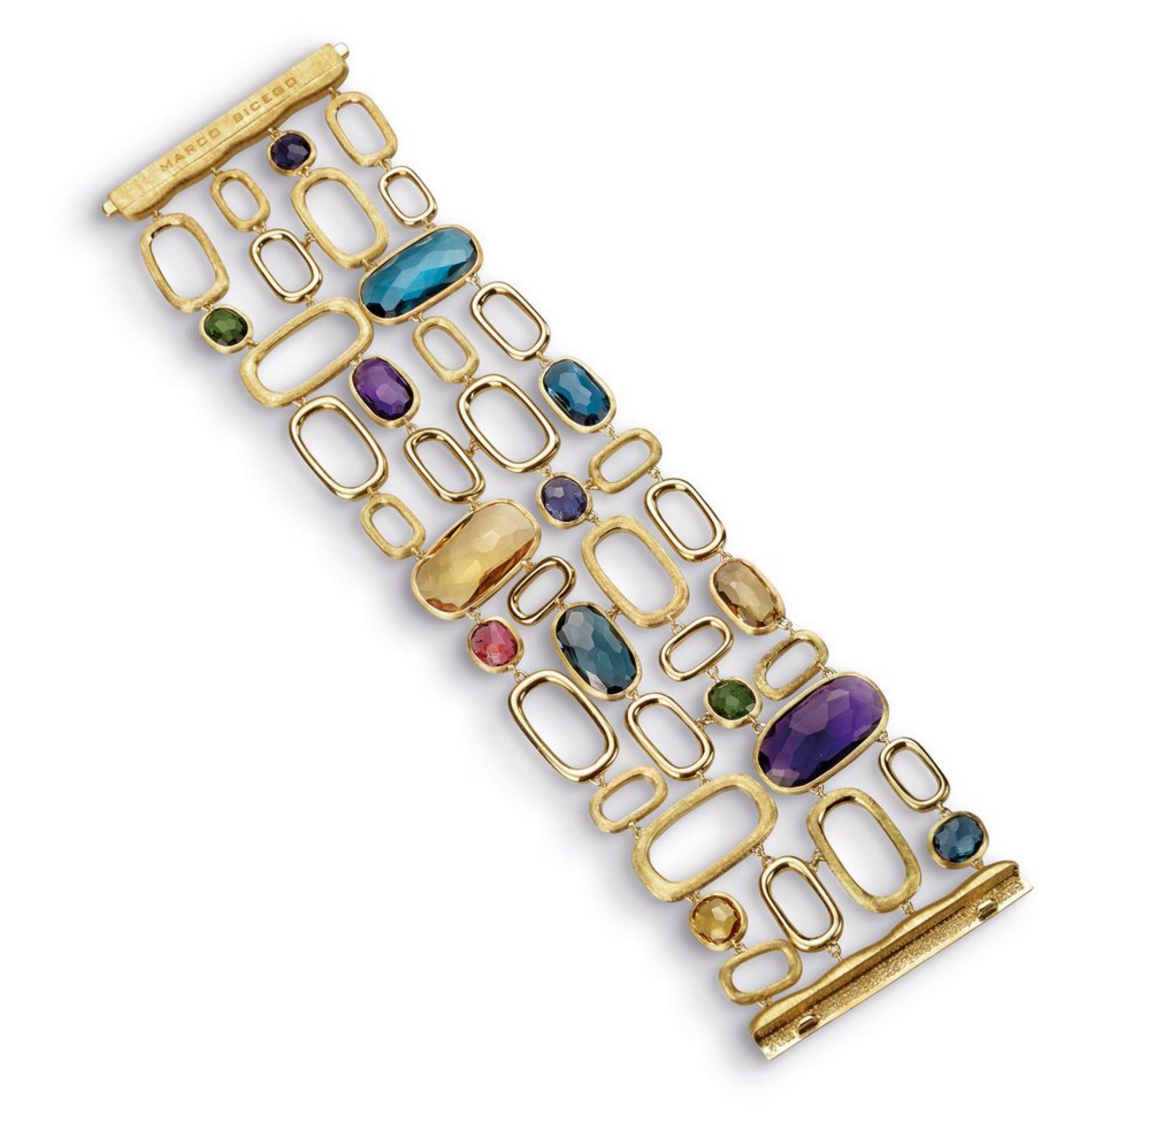 Marco Bicego Murano link bracelet in gold and mixed semi-precious stones